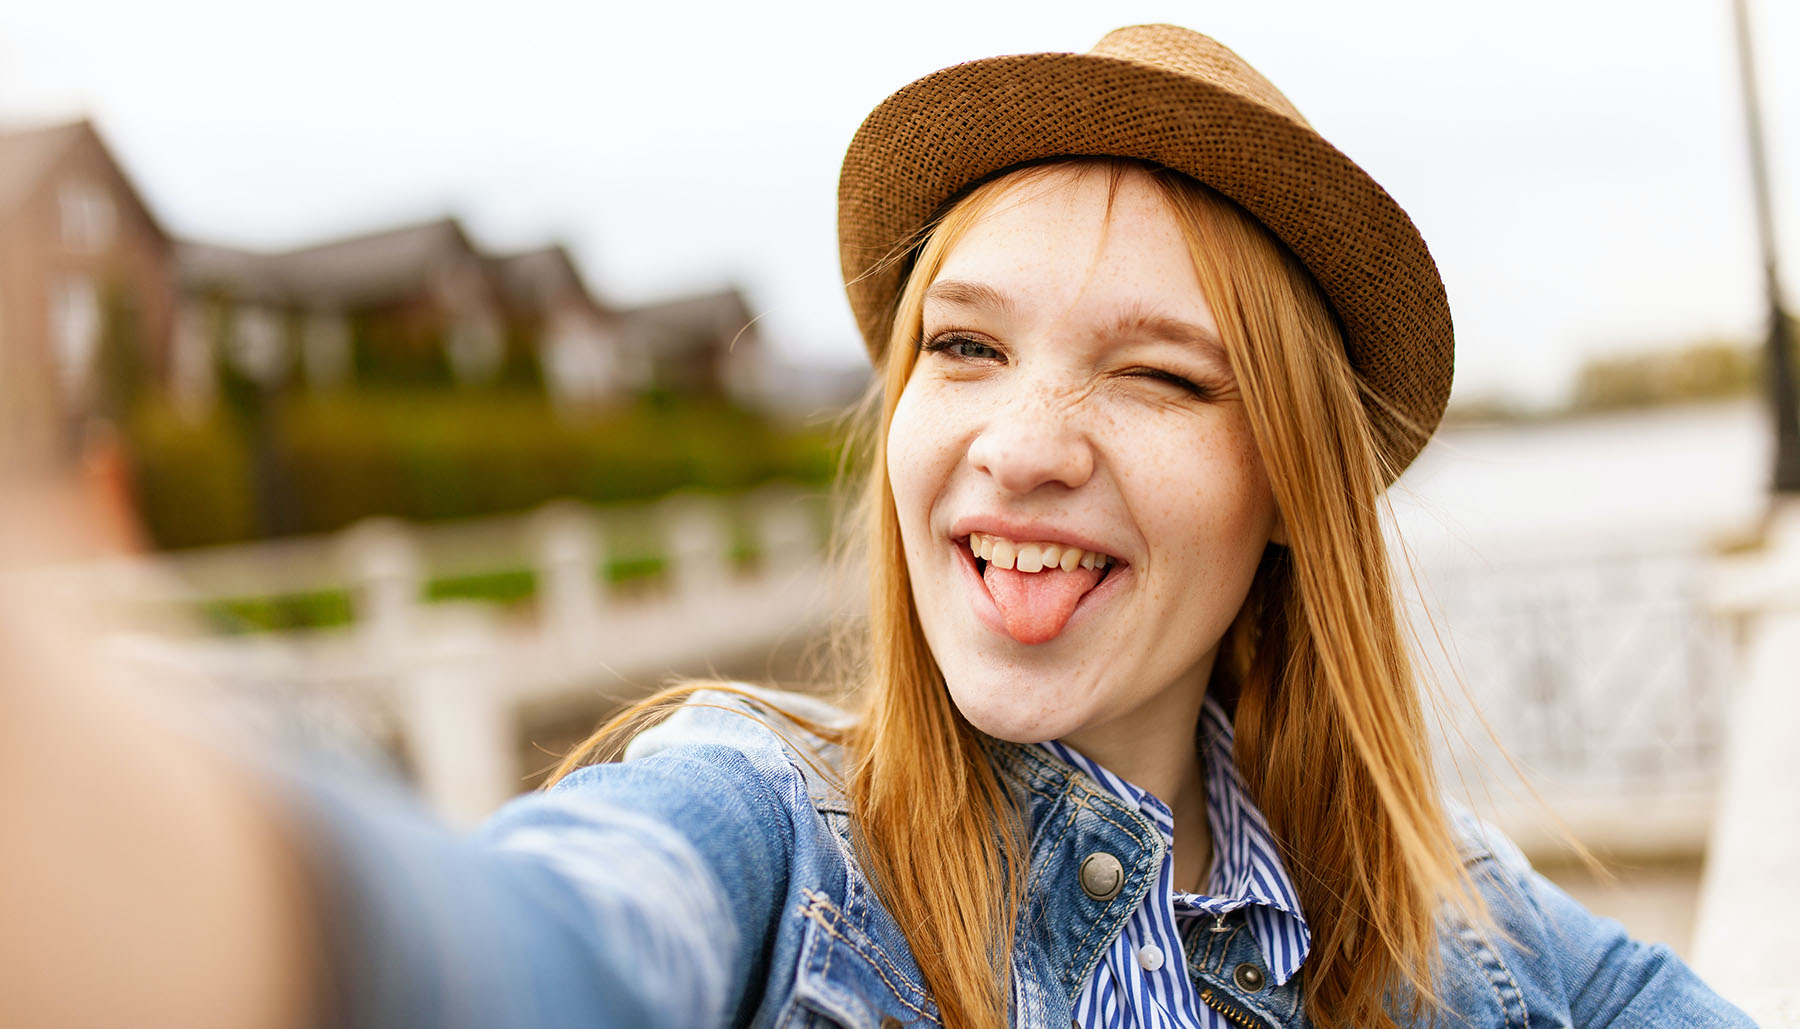 Red-headed woman making a goofy face in a selfie